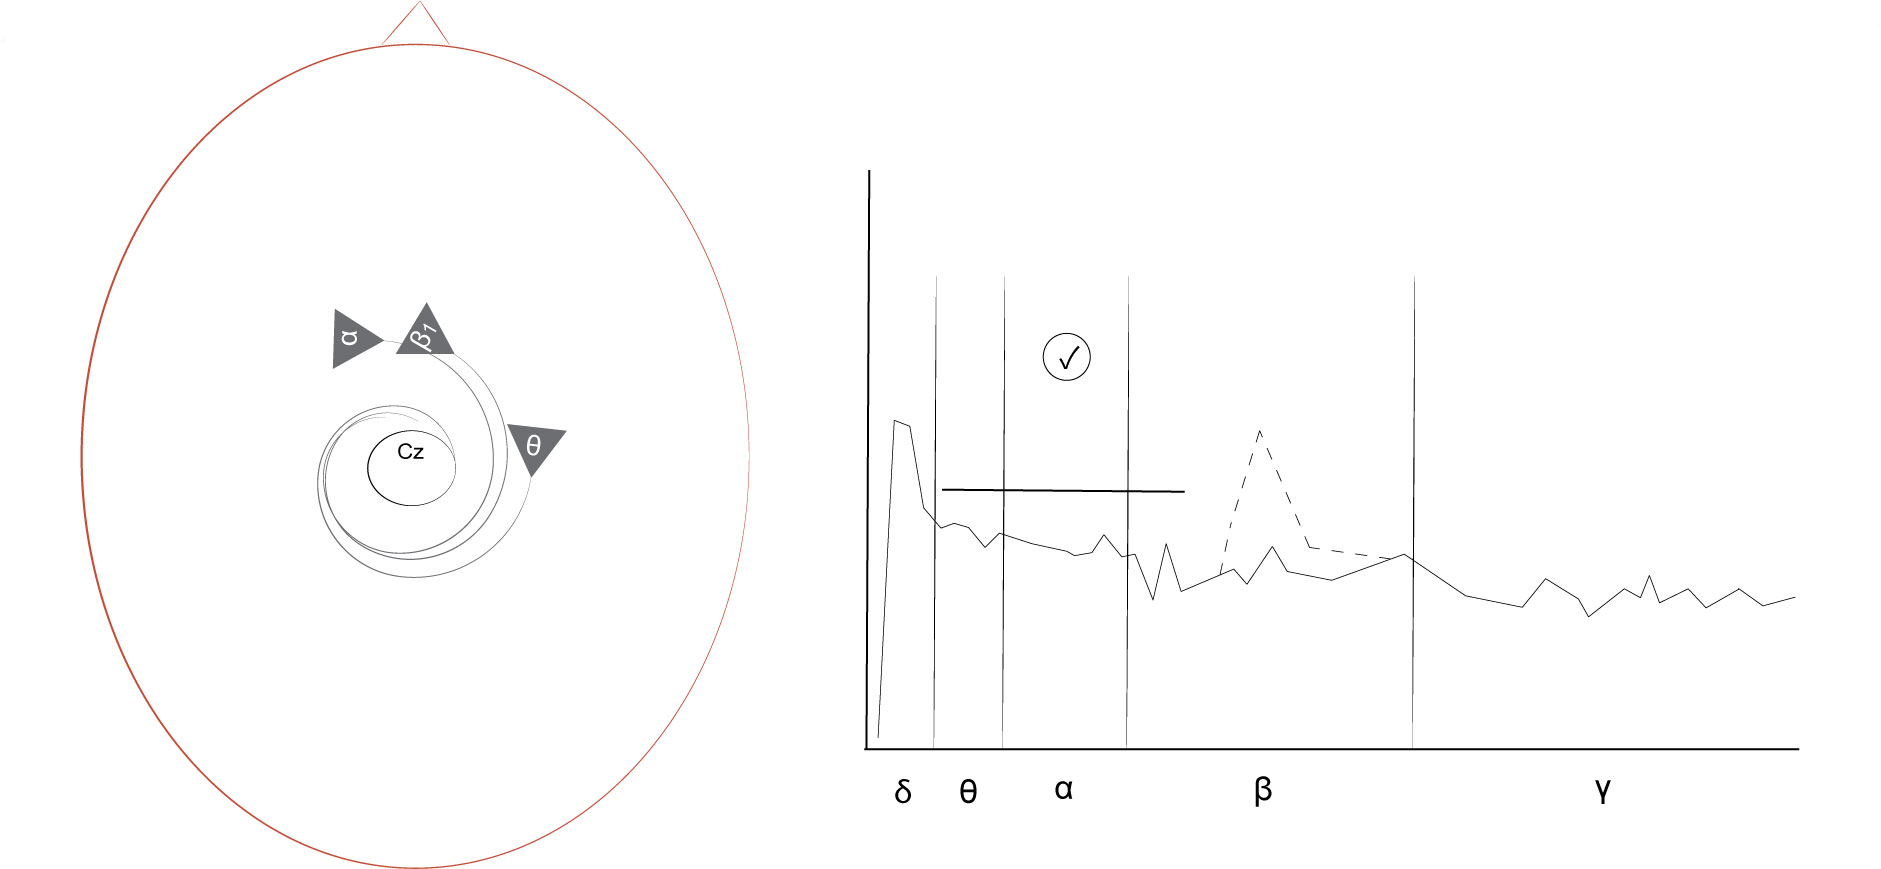 A sharp protocol's electrode location (left) and spectral plot (right) show the application of one wide inhibitor between 4-20 Hz. The peak with the dotted line indicates the brain activity of the particular task performed.